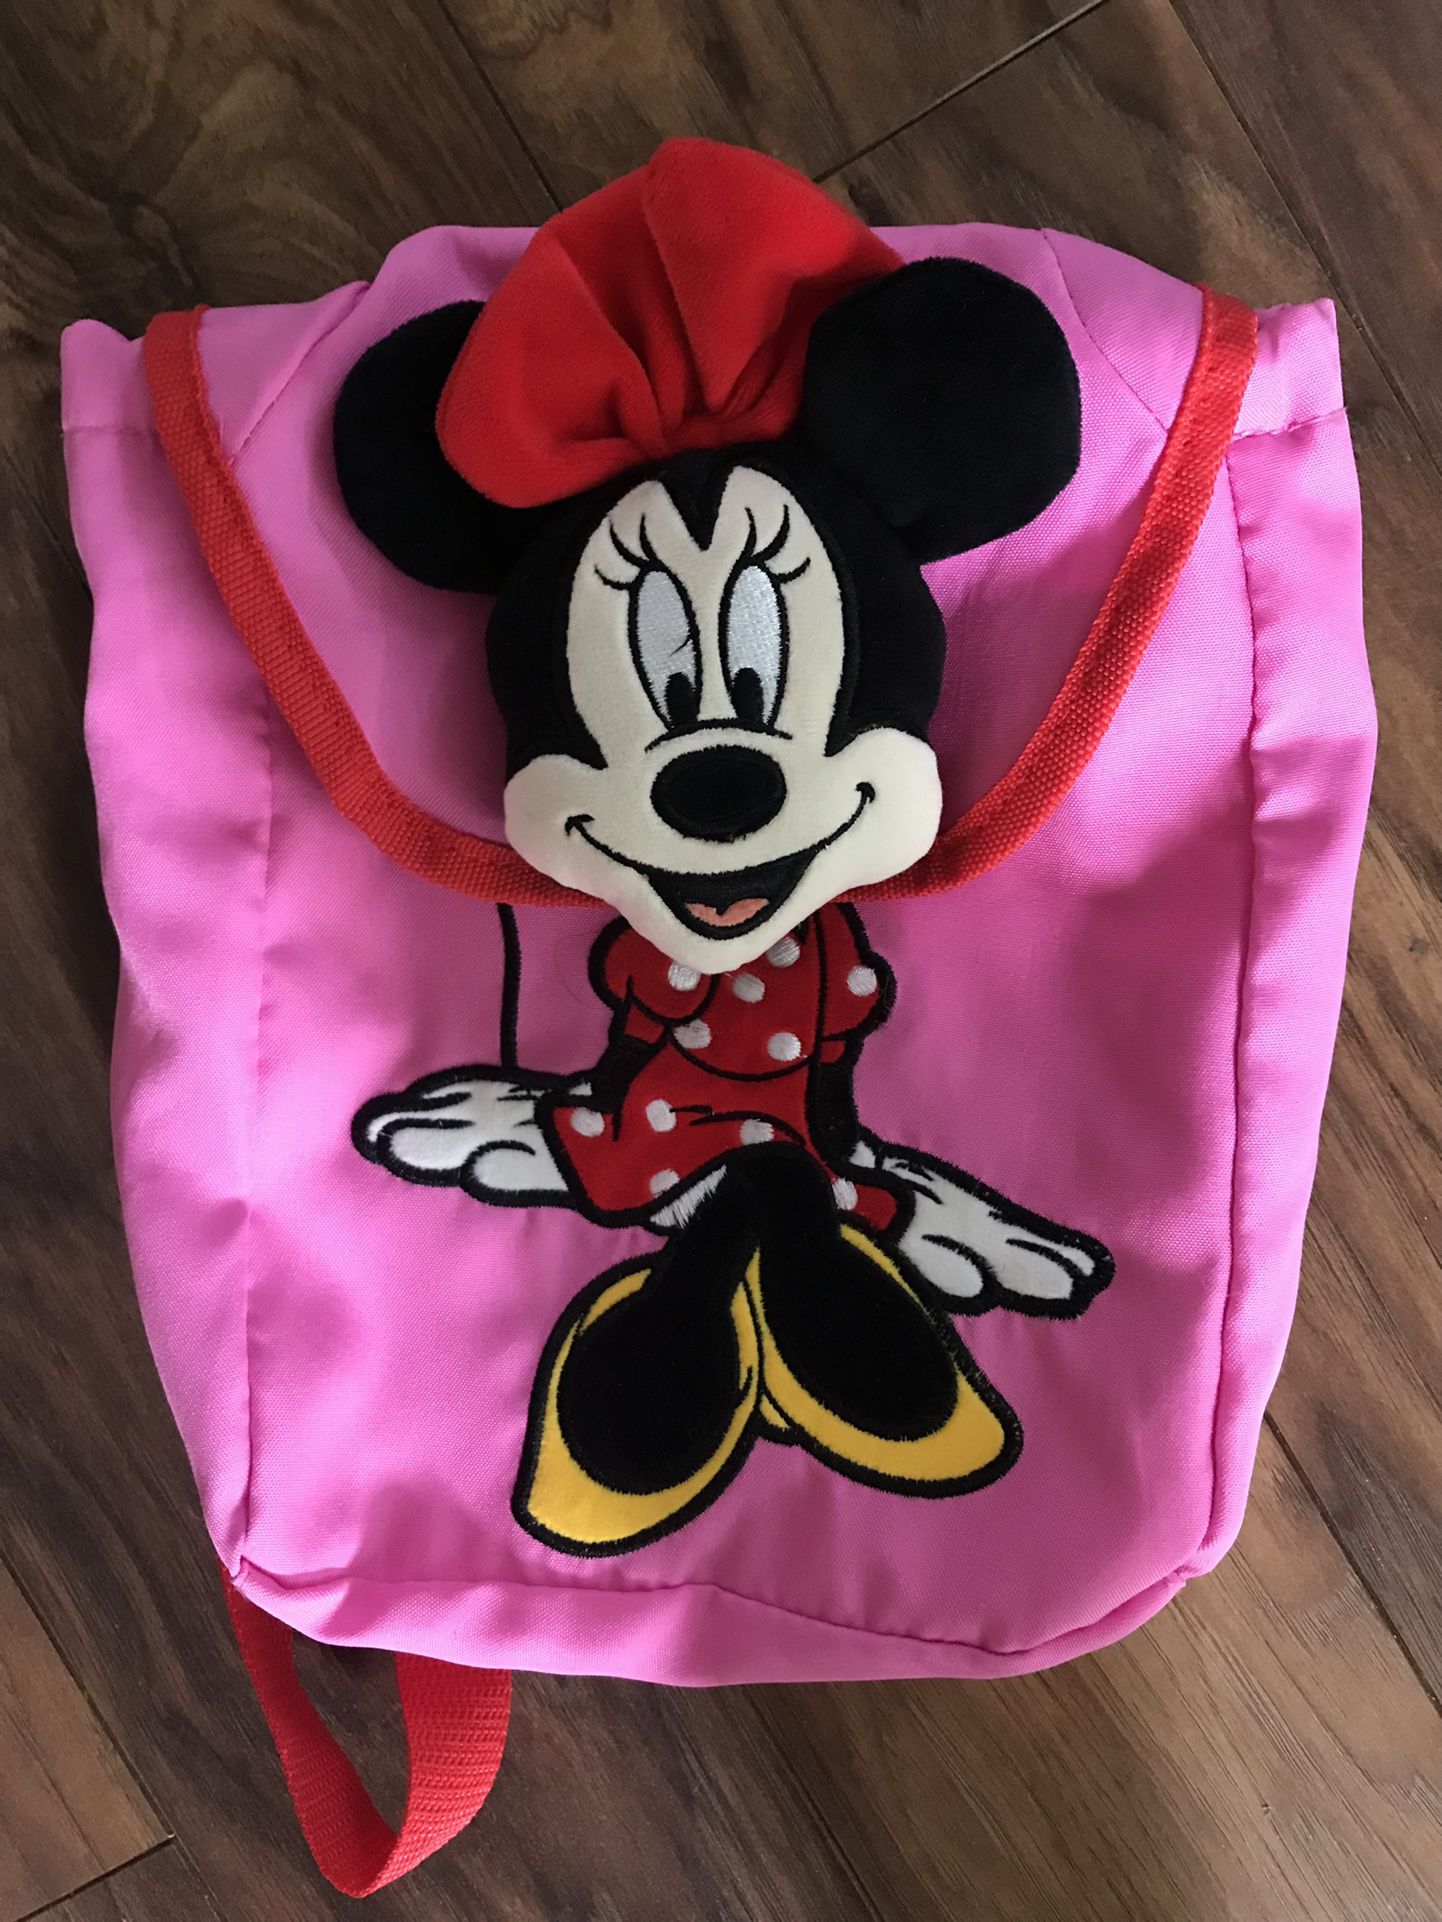 BackPack - Minnie Mouse Disney